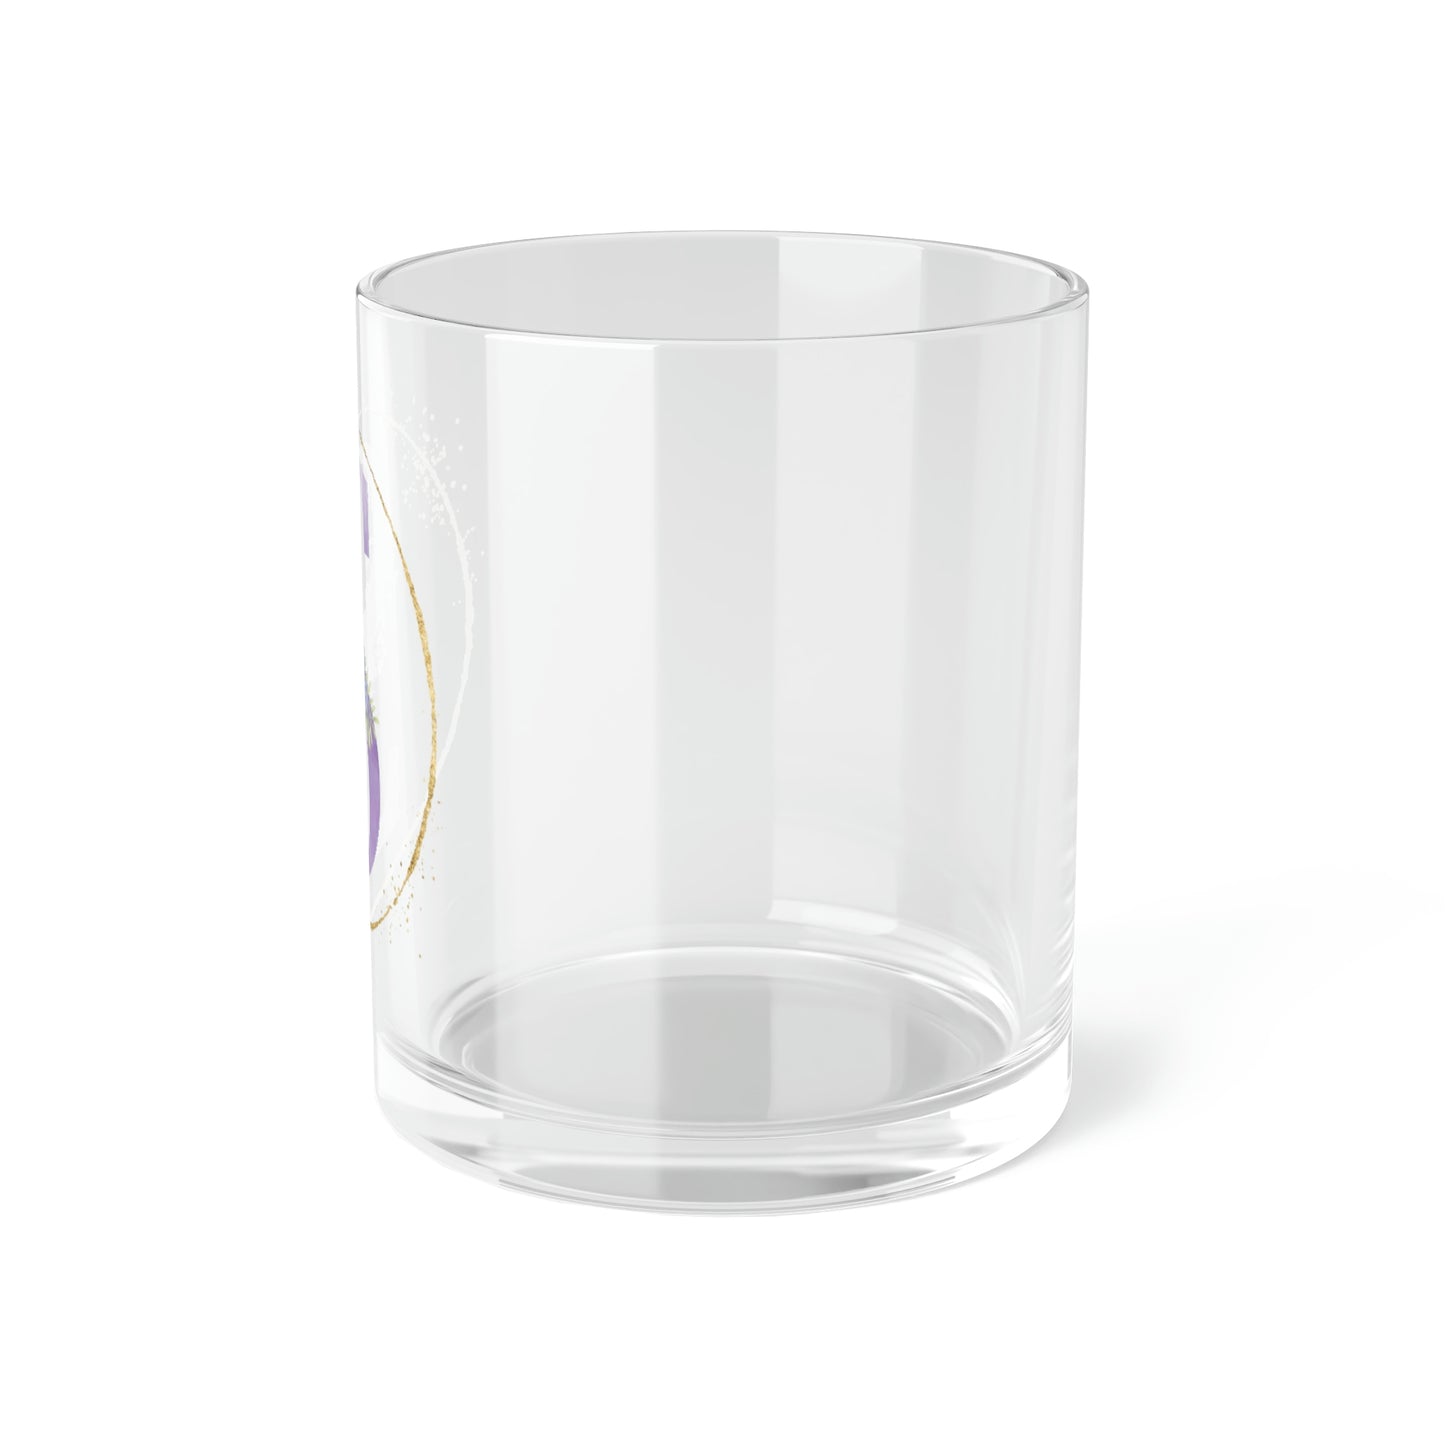 Personalized Drinking Glasses